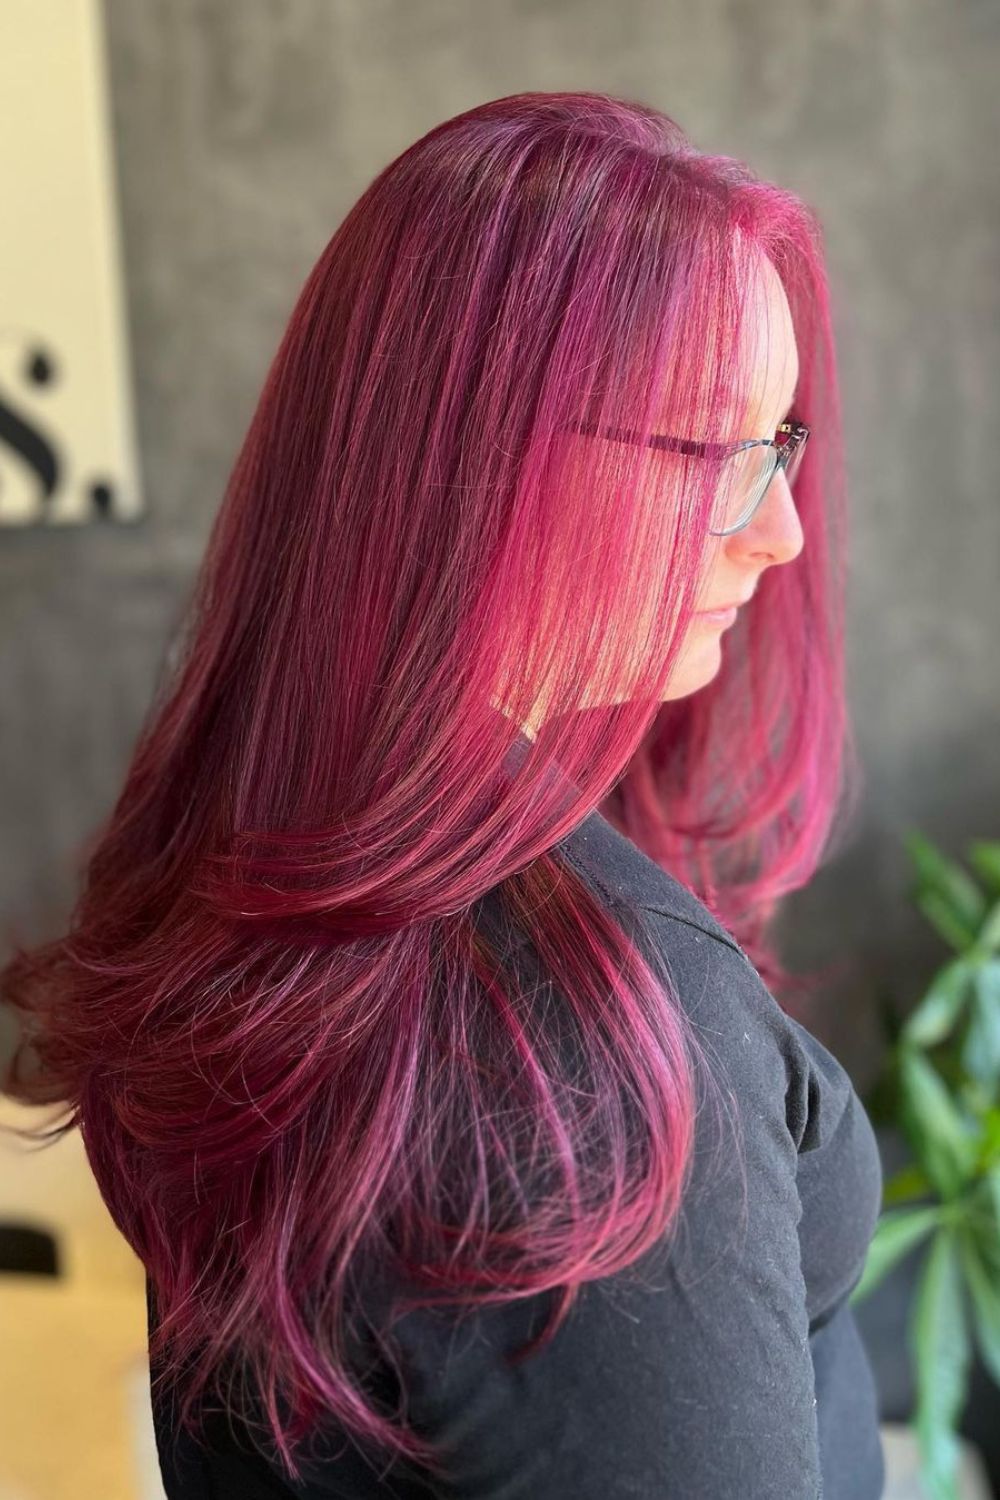 A woman with long straight violet red hair.